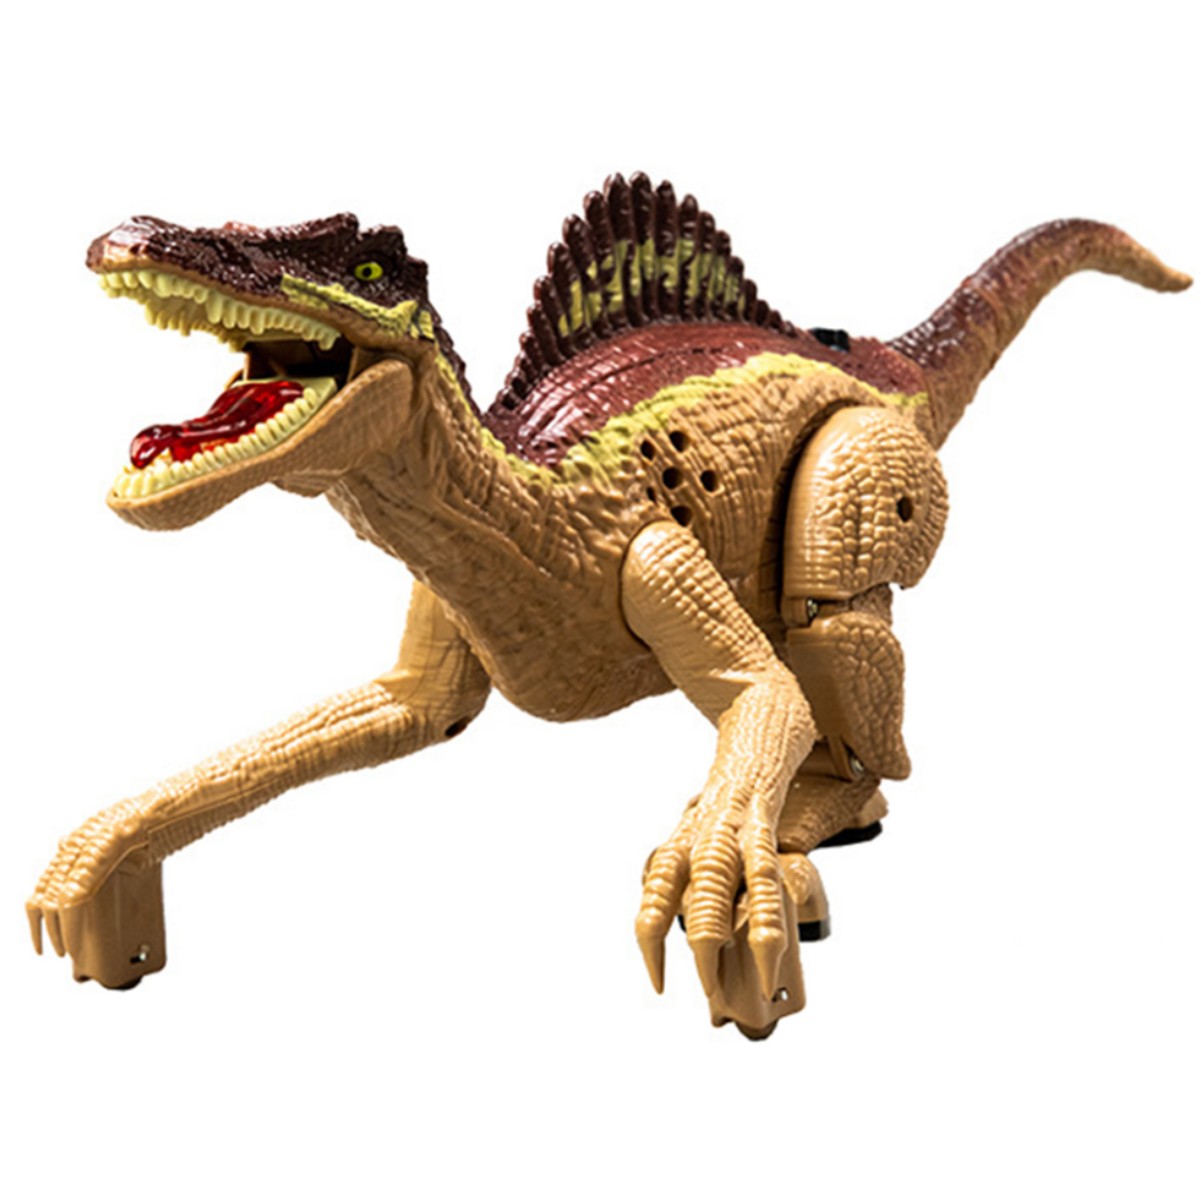 Remote Control Jurassic Dinosaur Toys For Kids 2.4Ghz Gesture Sensing RC Walking Dinosaur Robot Toy With Light Sound Birthday Gifts For Boys Girls